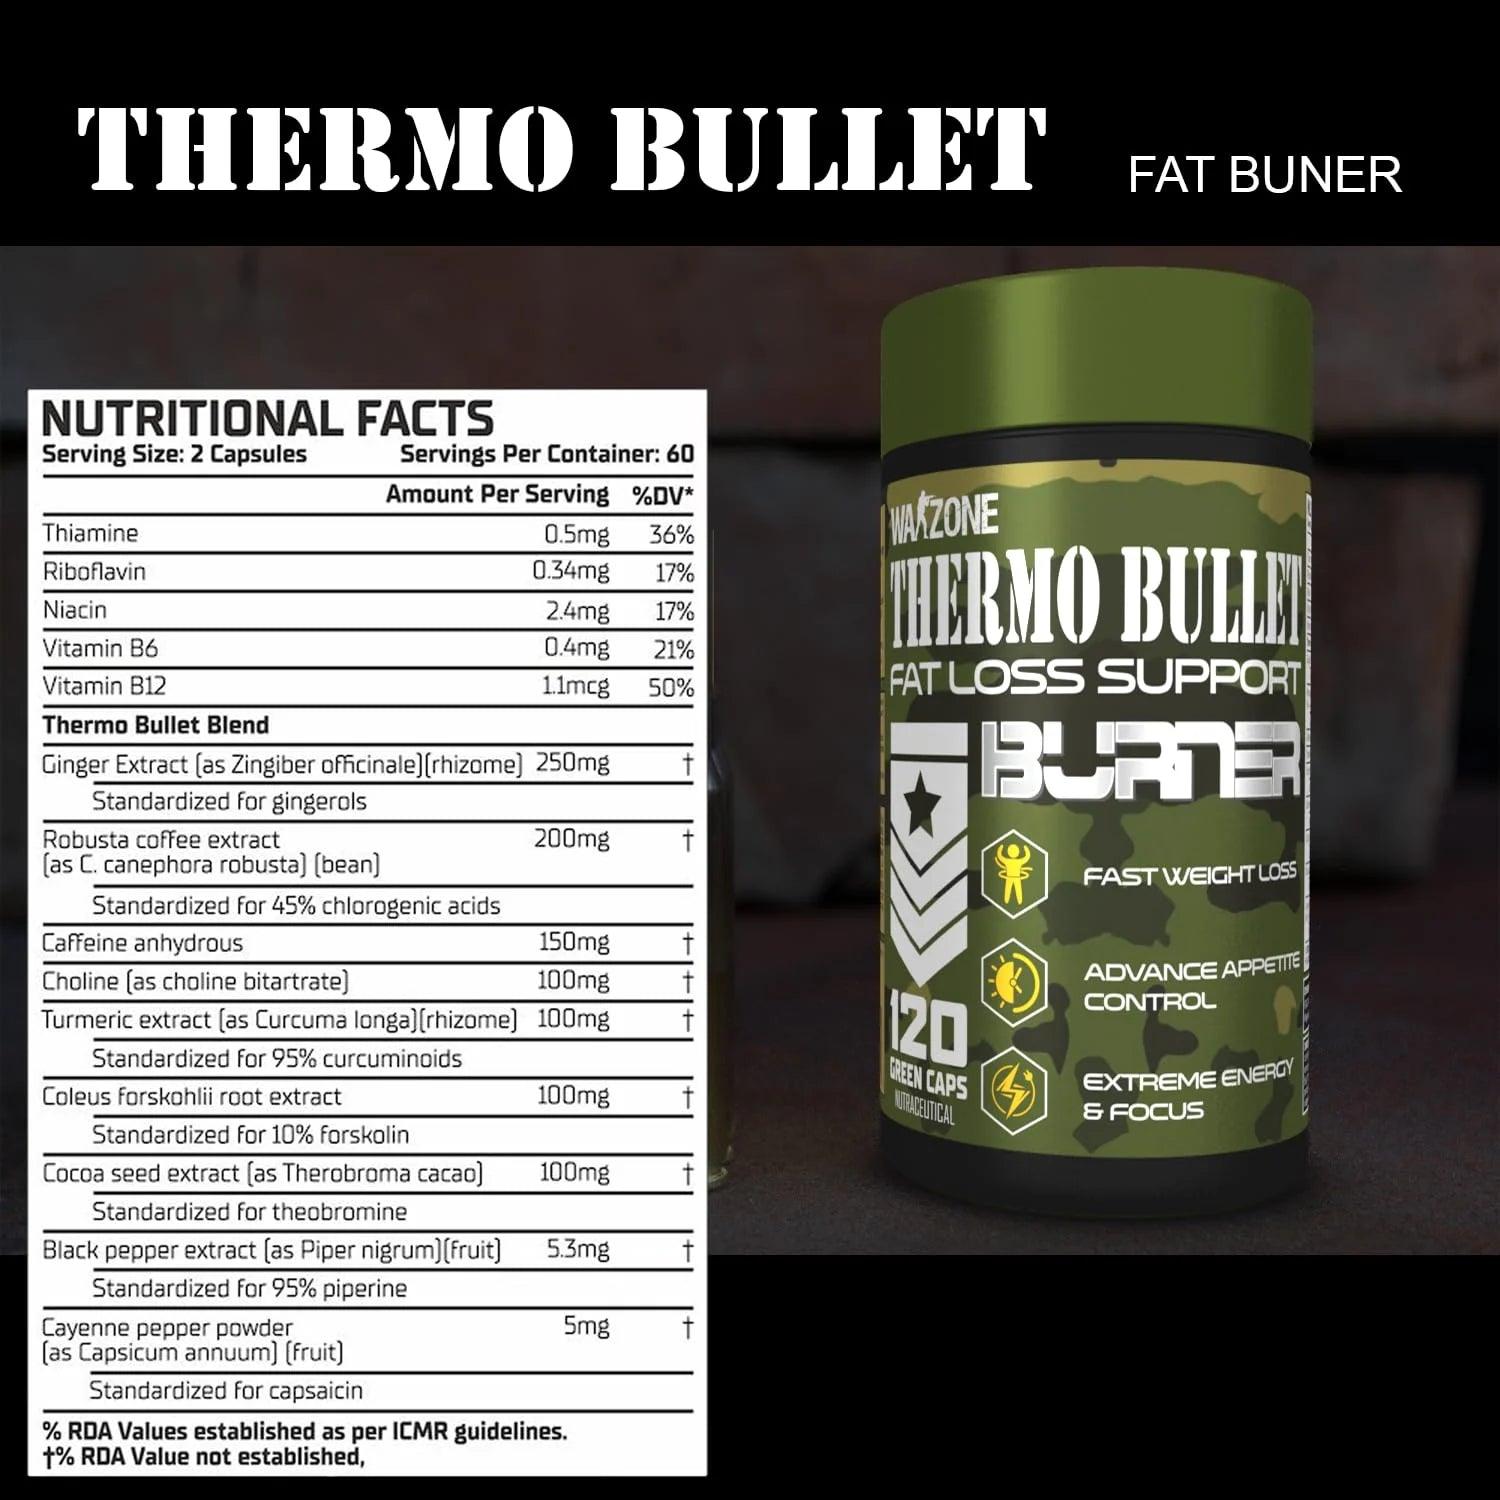 Warzone Thermo Bullet Thermogenic Fat Burner - Wellness Shoppee